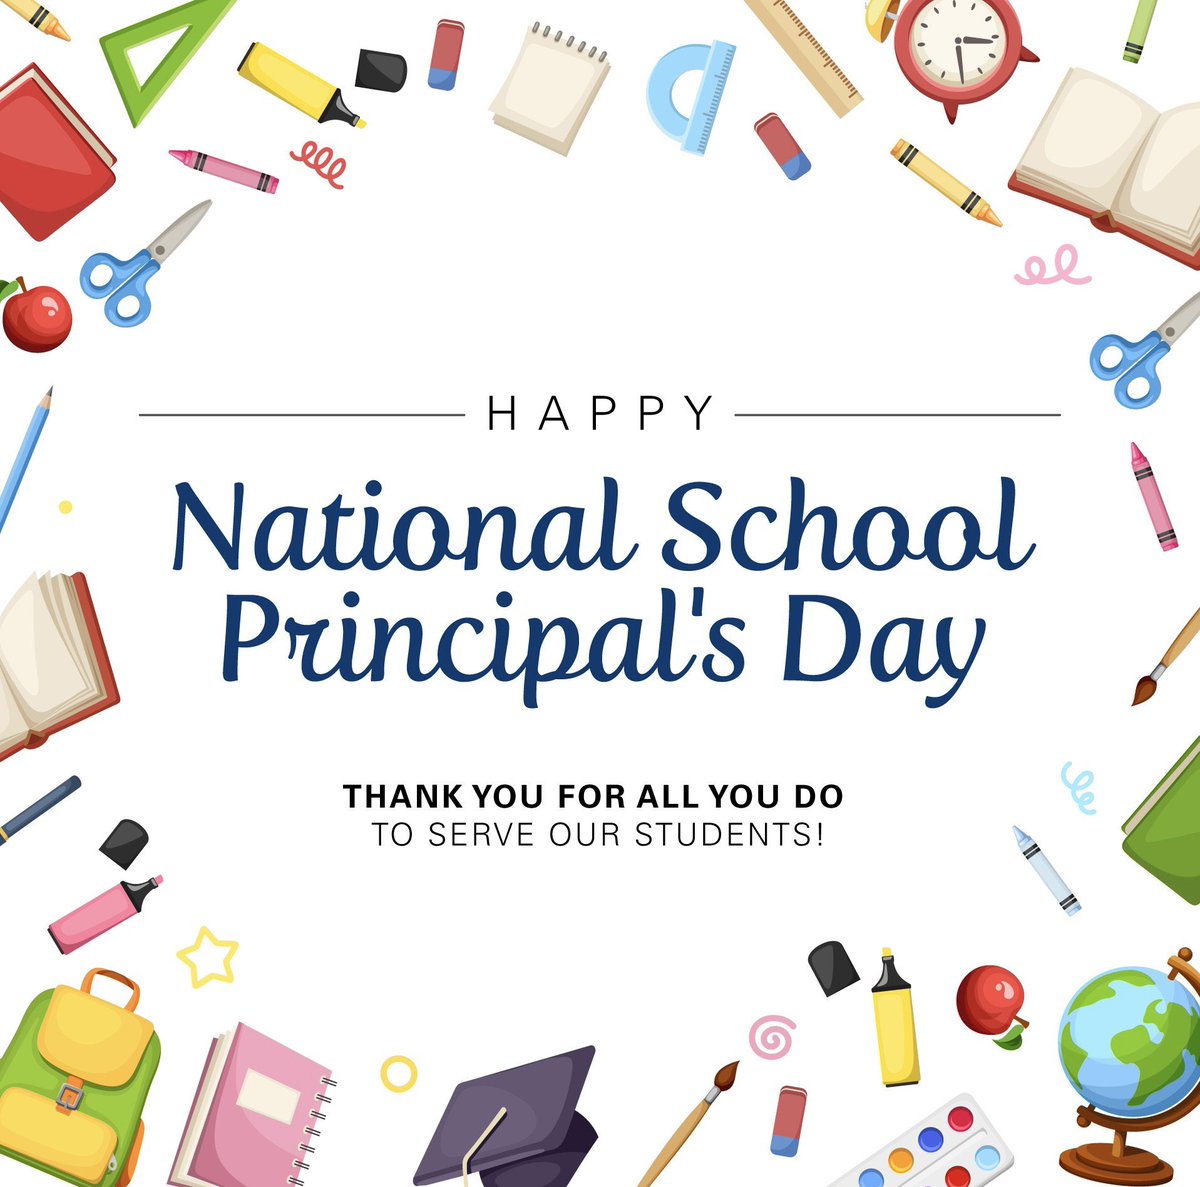 His Nike shoe game is on point, and when he’s not leading the charge at school he’s watching the Braves, ATL United, or playing golf. Thank you for your leadership Dr Pritz, we appreciate all you do. Happy Principal Day! @cobbschools #LearnLeadExcel #principalsday2024